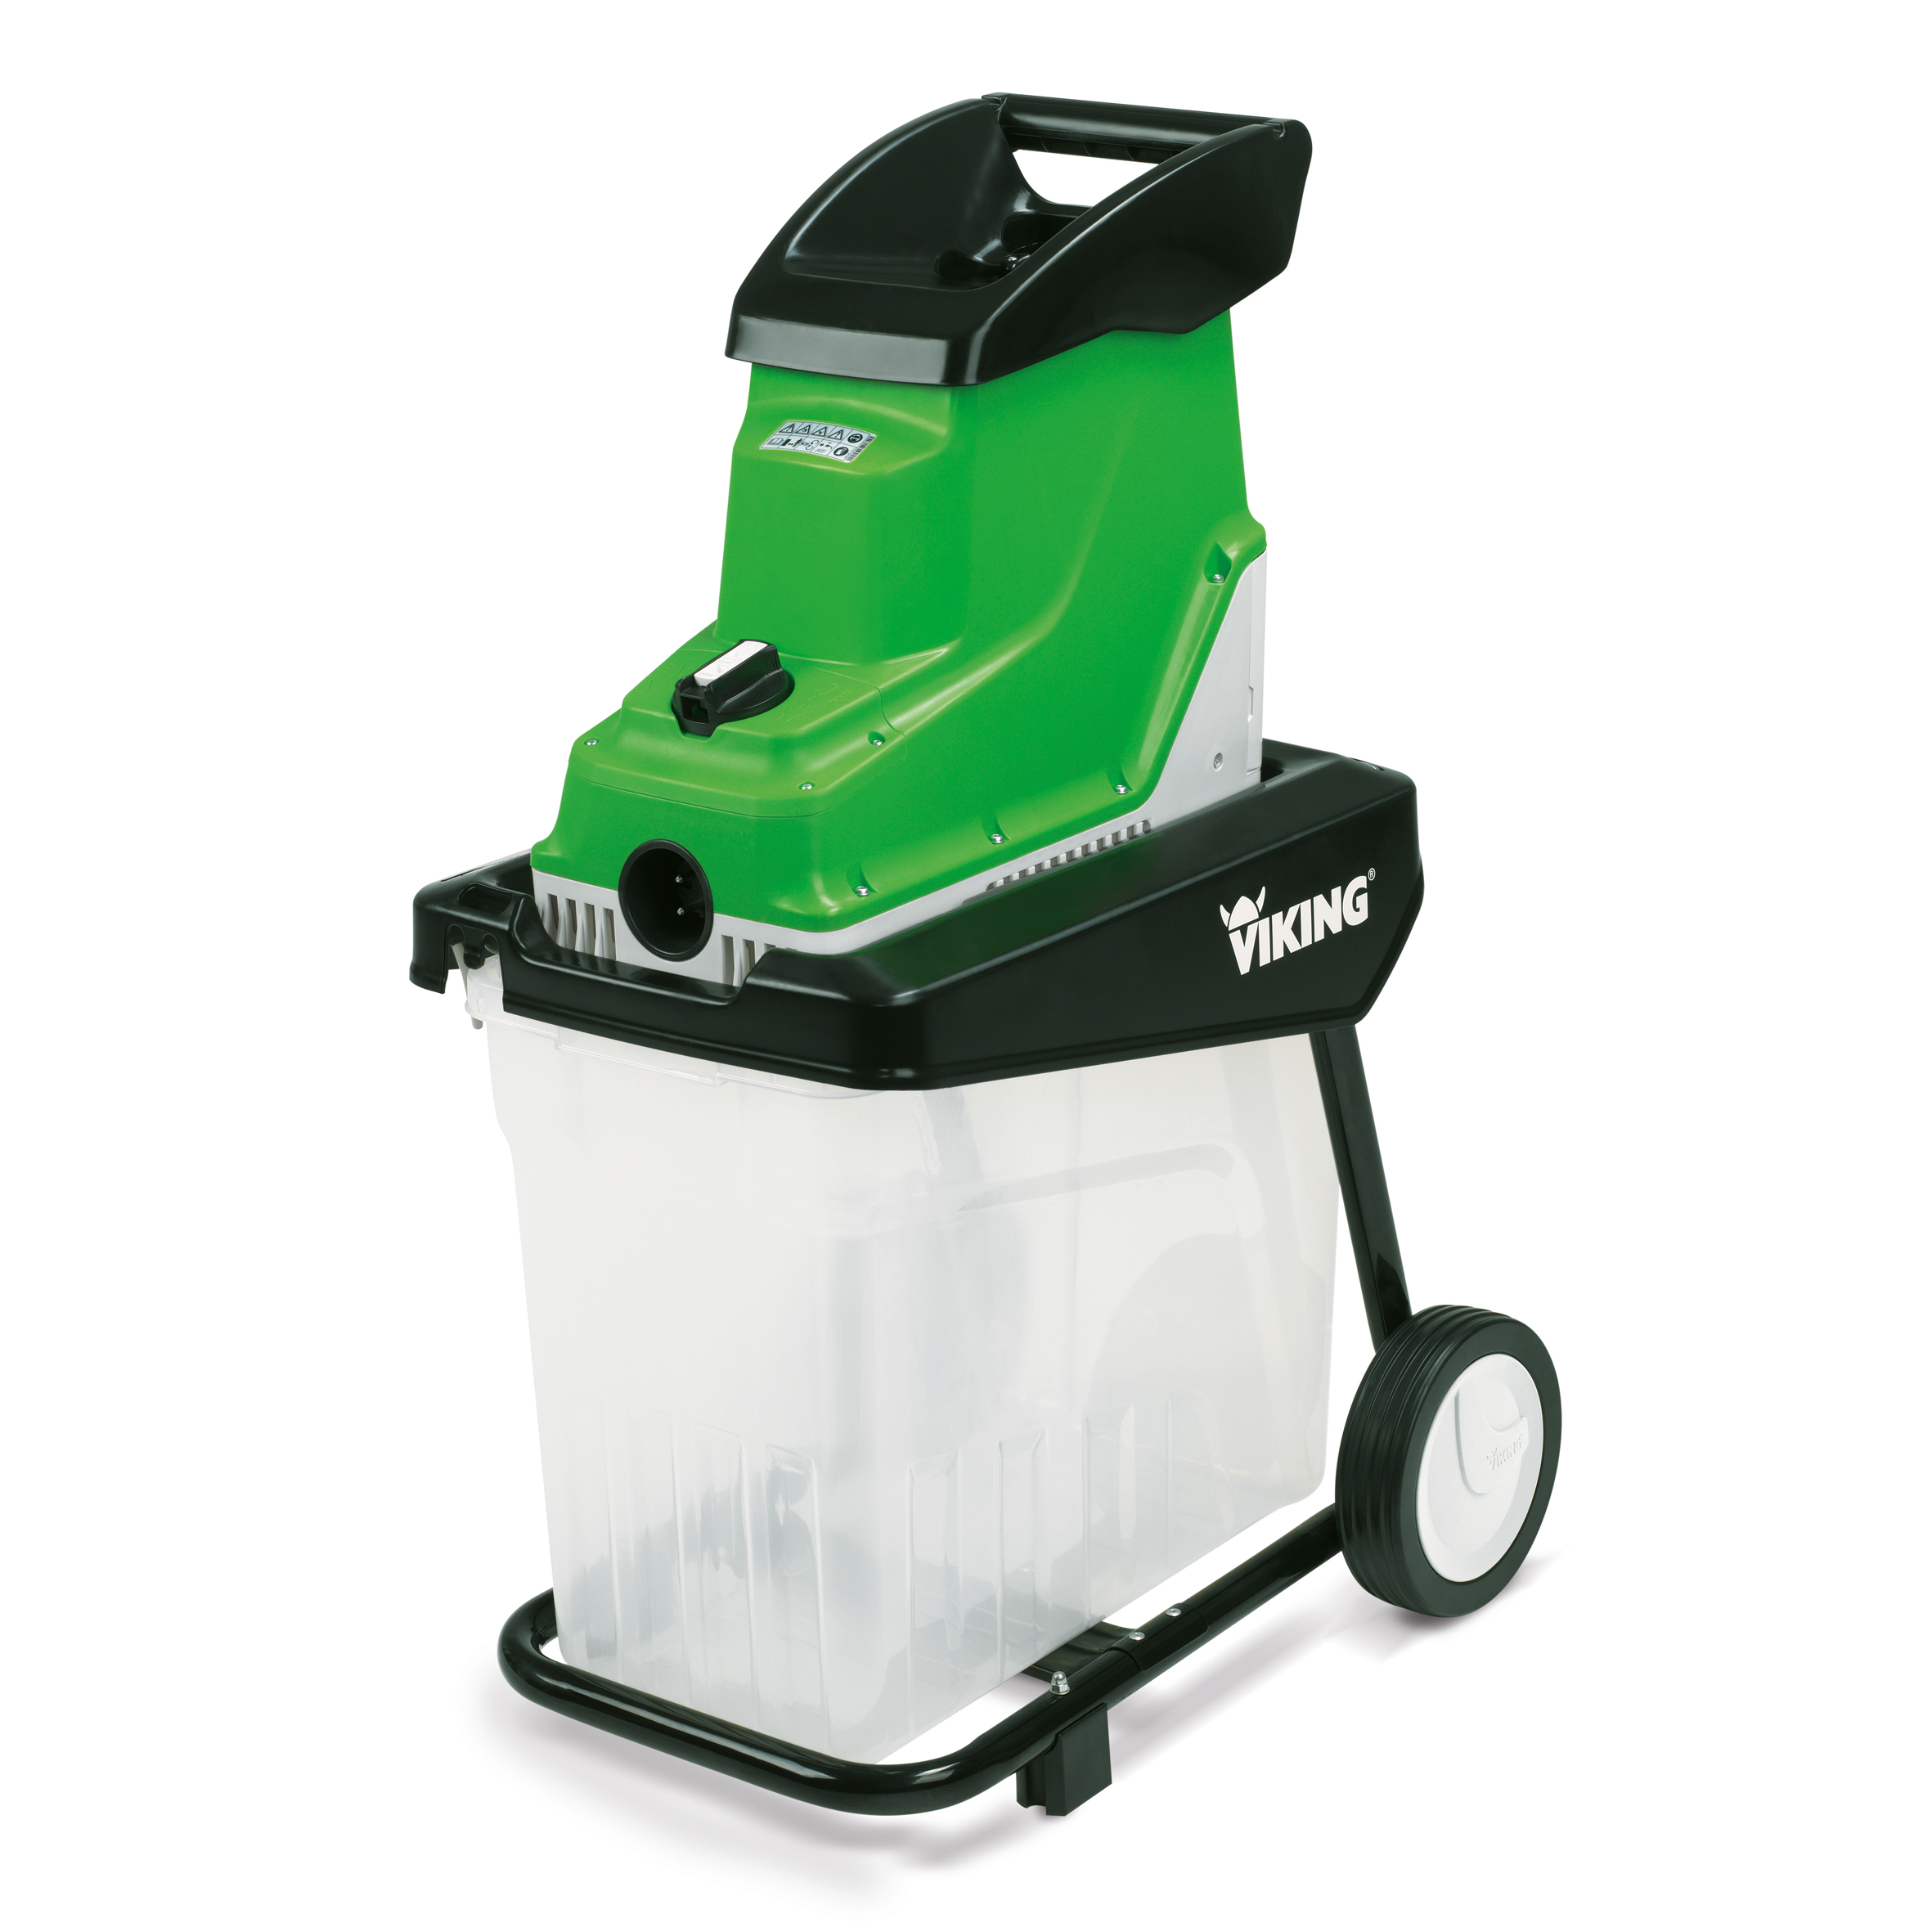 The new VIKING GE 135 L and GE 140 L electric garden shredders ...